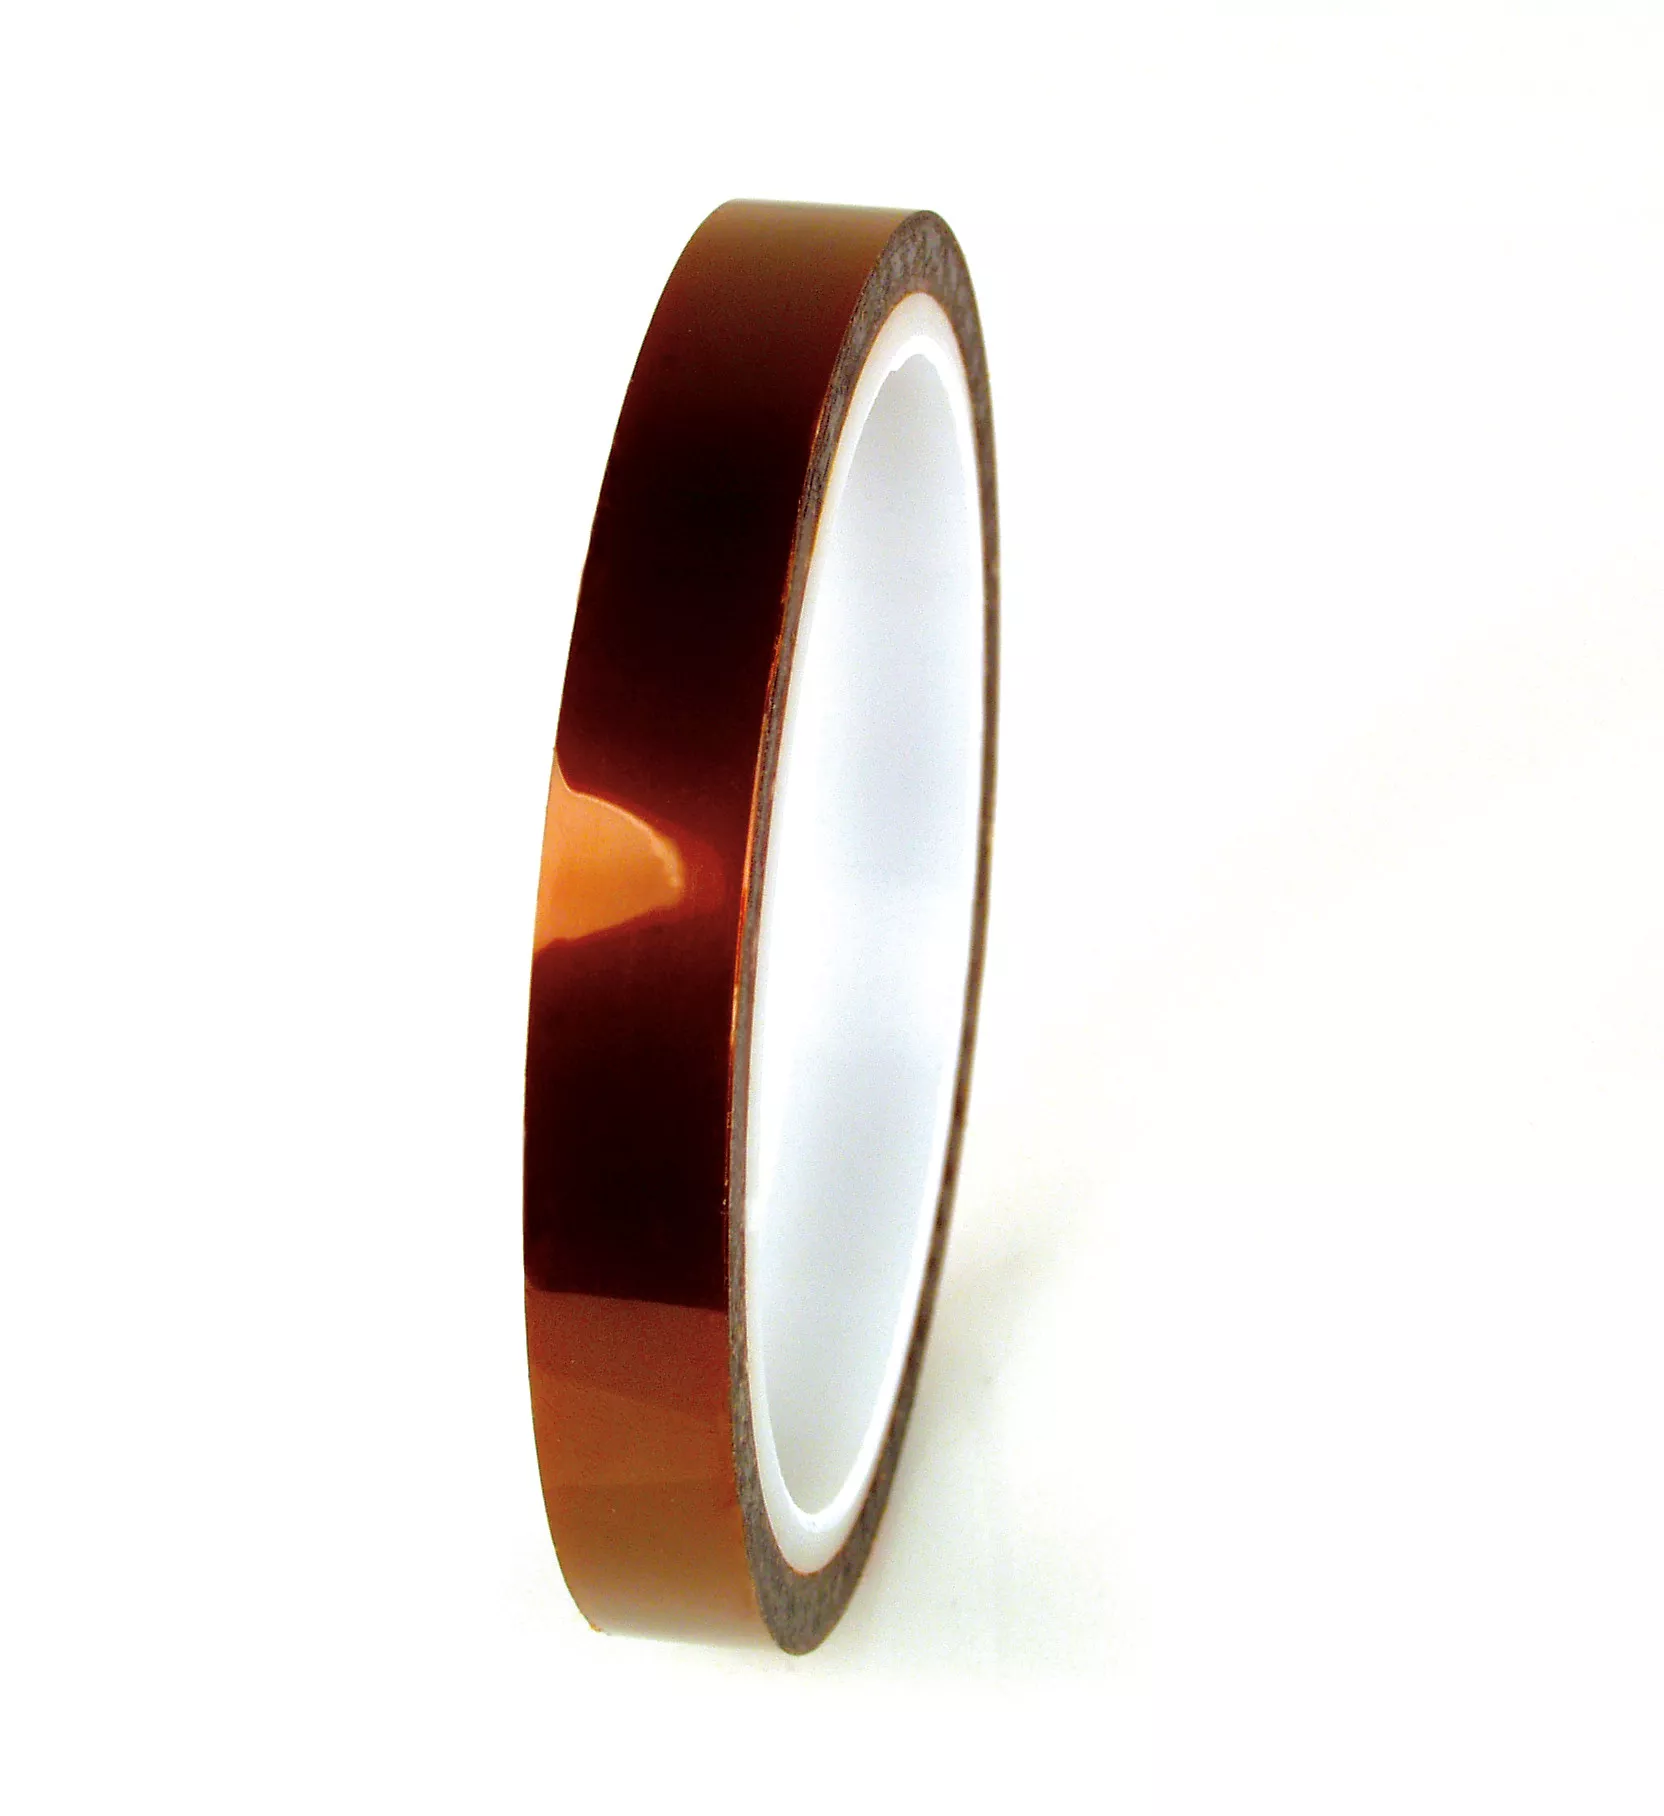 SKU 7010399894 | 3M™ Polyimide Film Electrical Tape 1218